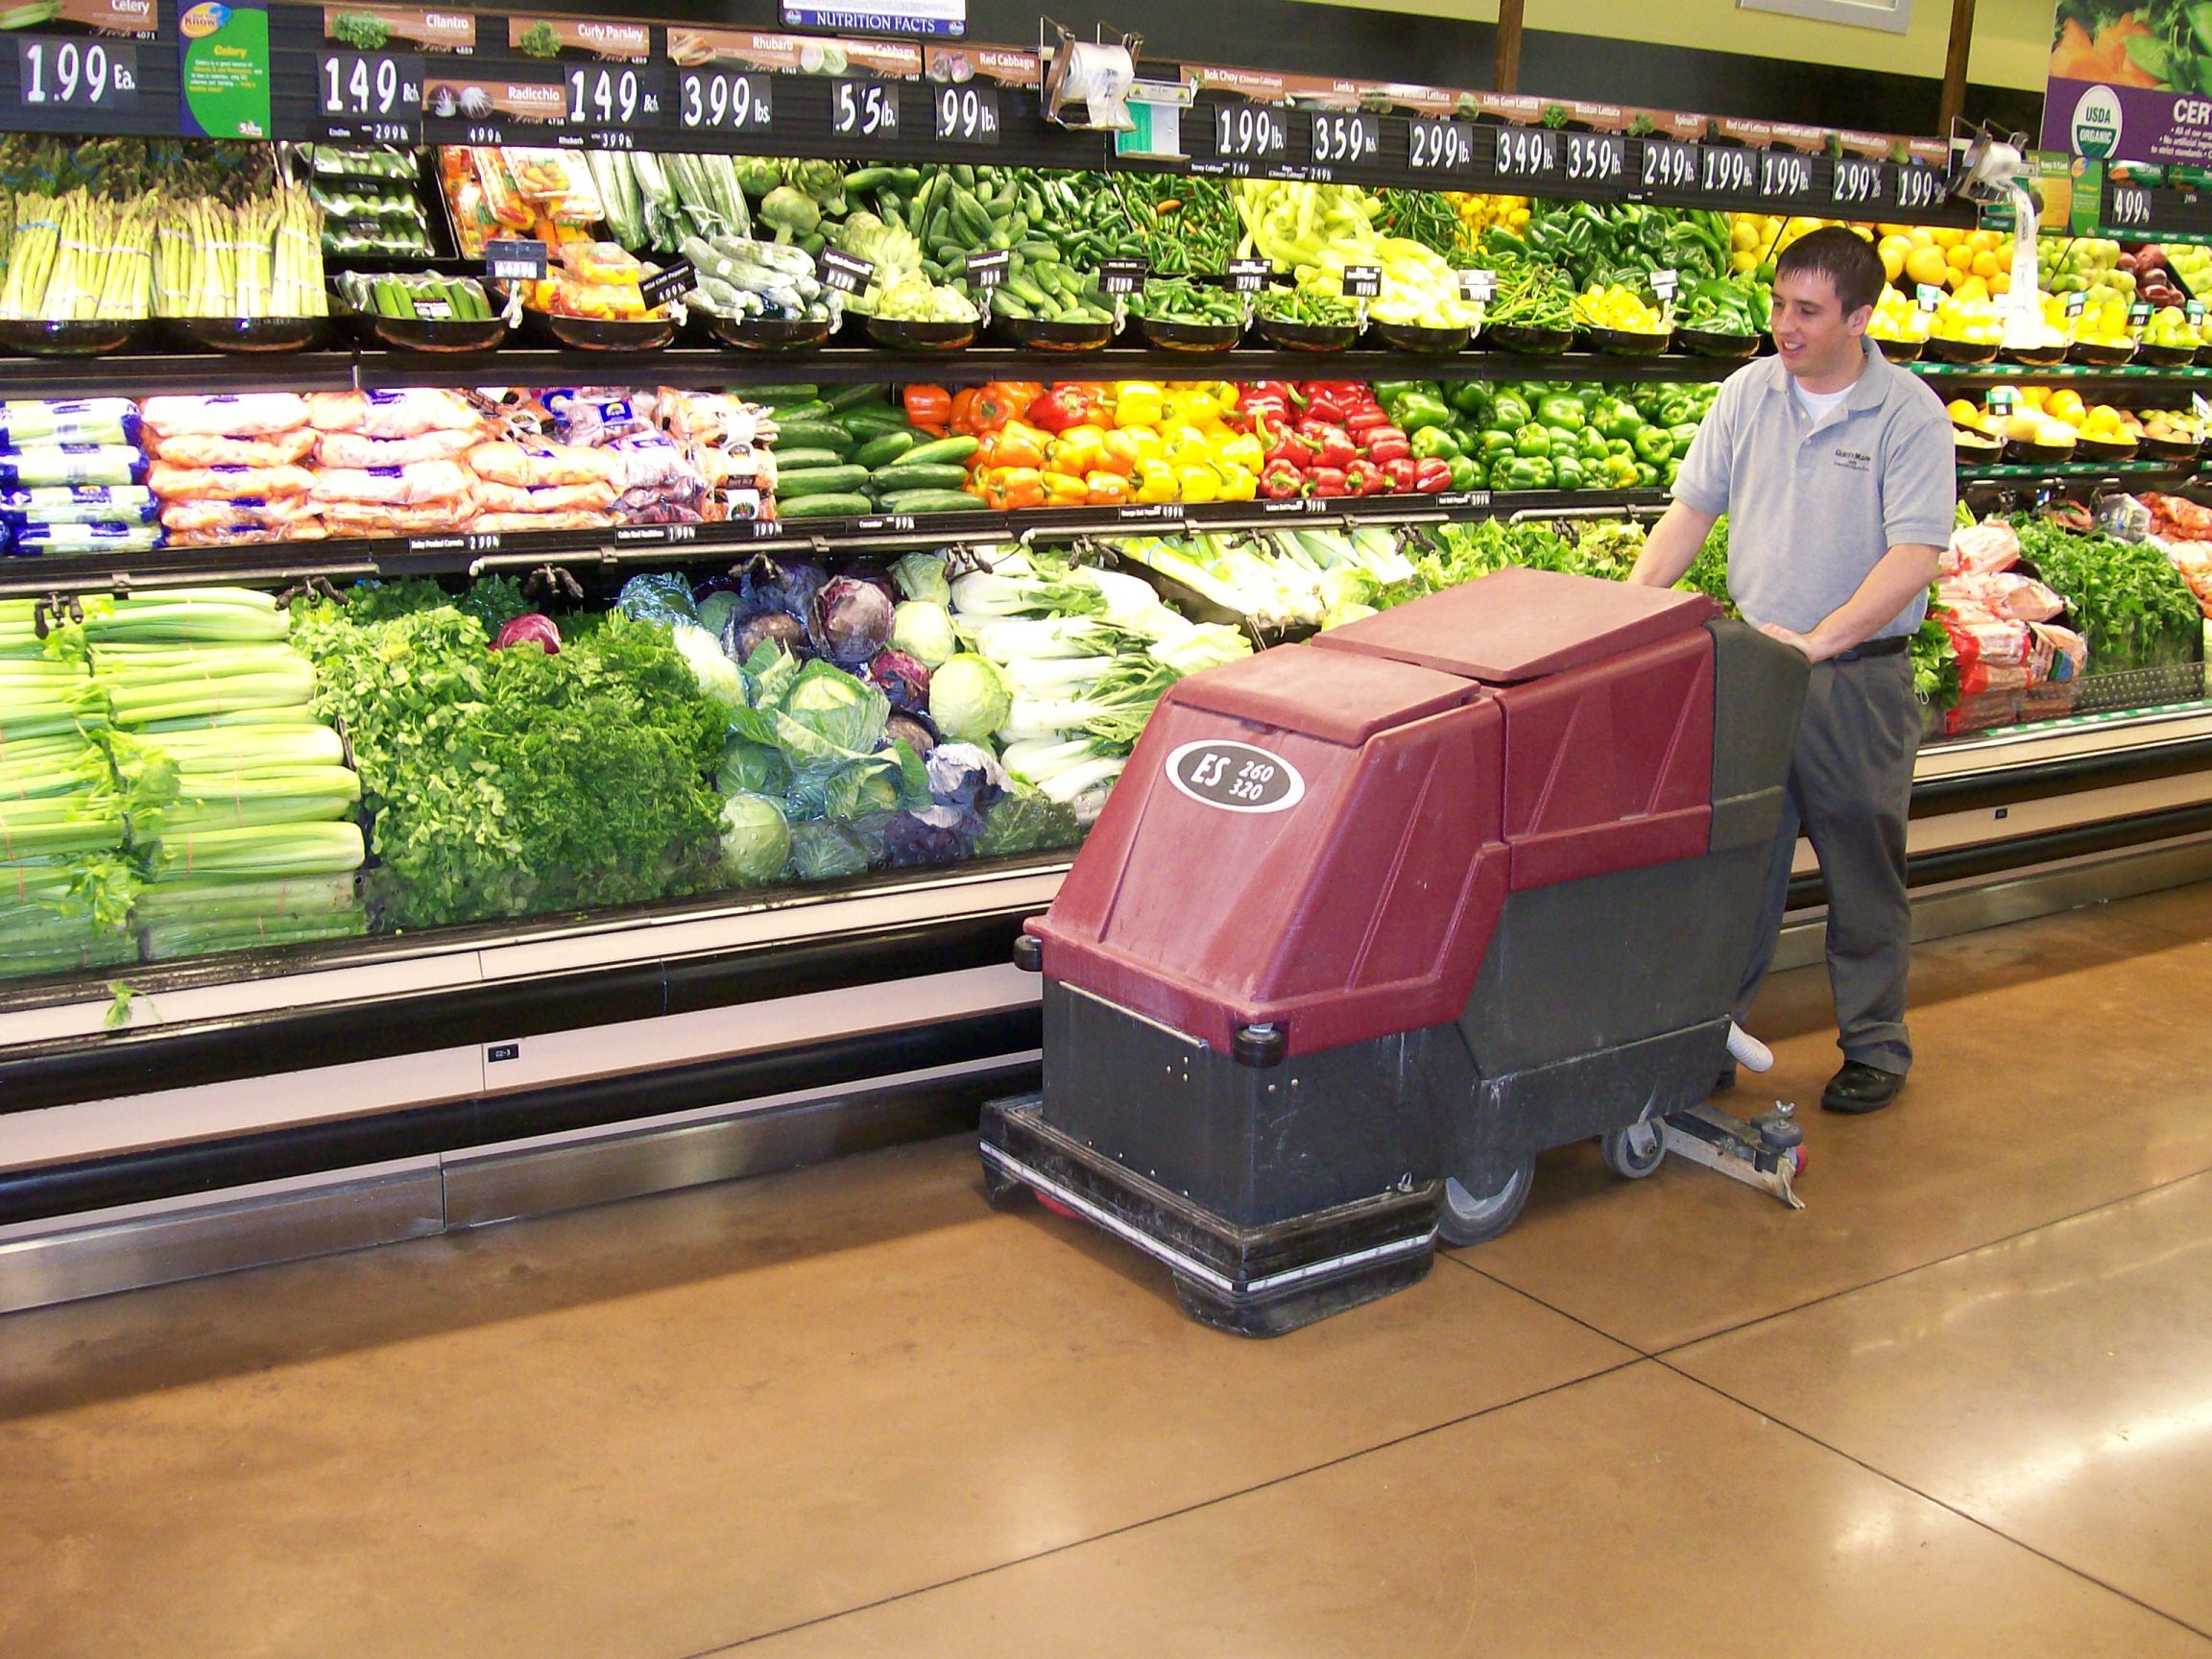 commercial floor cleaning being done in grocery store